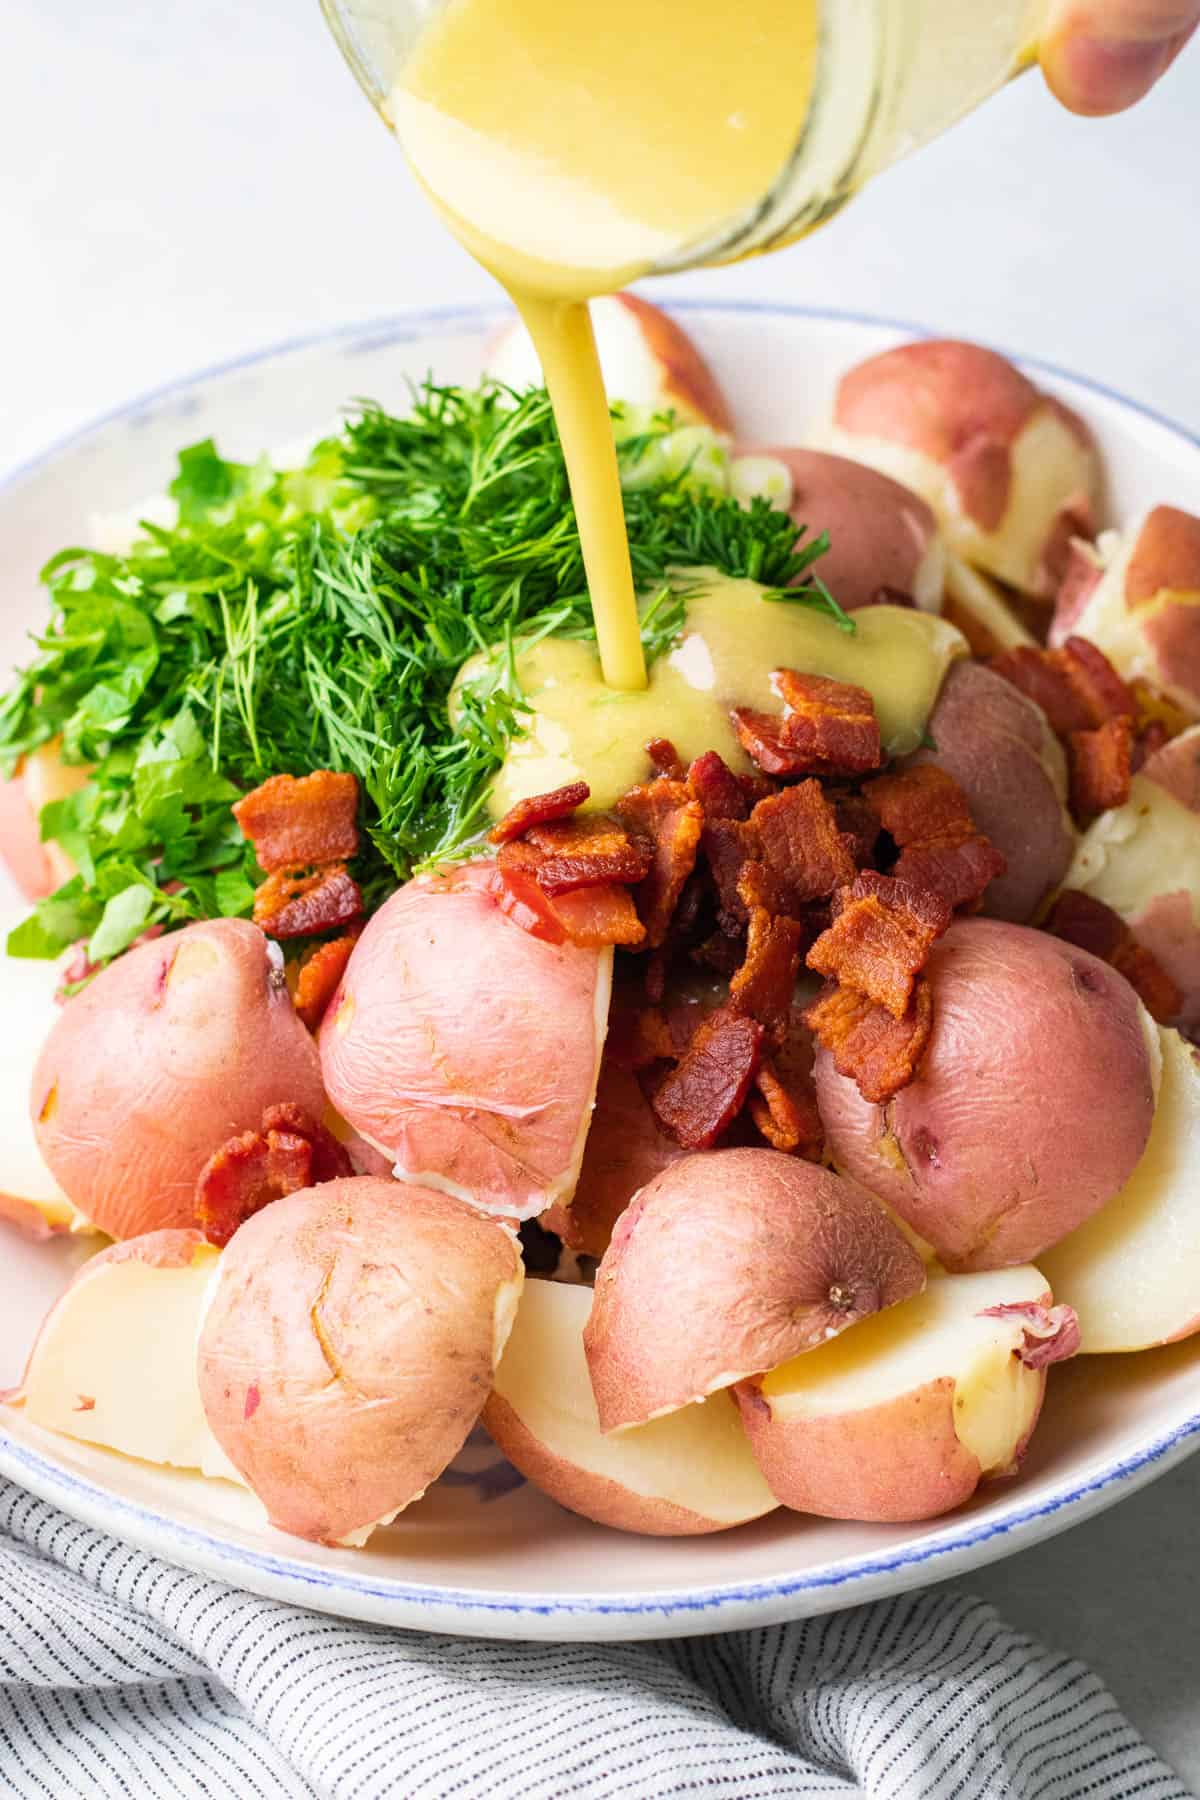 Pouring salad vinaigrette over red potatoes, cooked bacon and herbs.